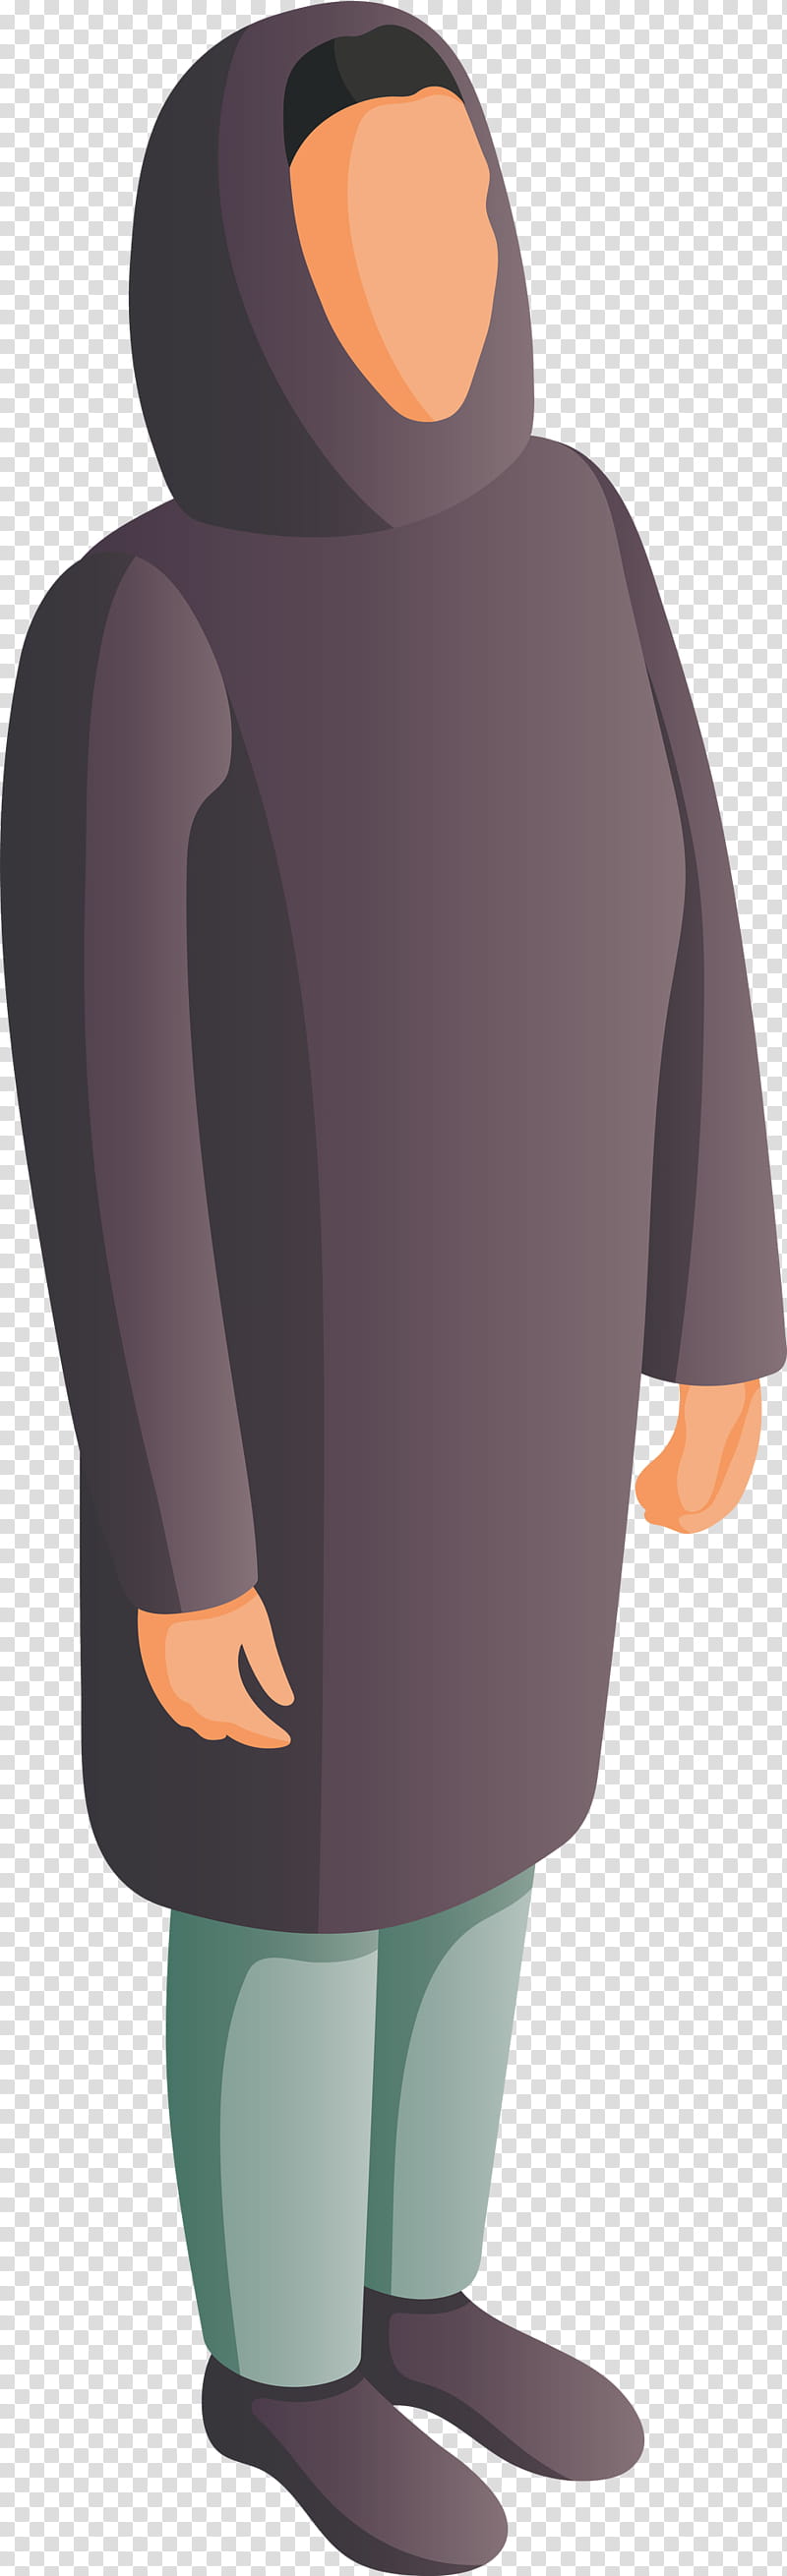 Arabic Family Arab people Arabs, Clothing, Pencil Skirt, Purple, Tshirt, Sleeve, Trousers transparent background PNG clipart